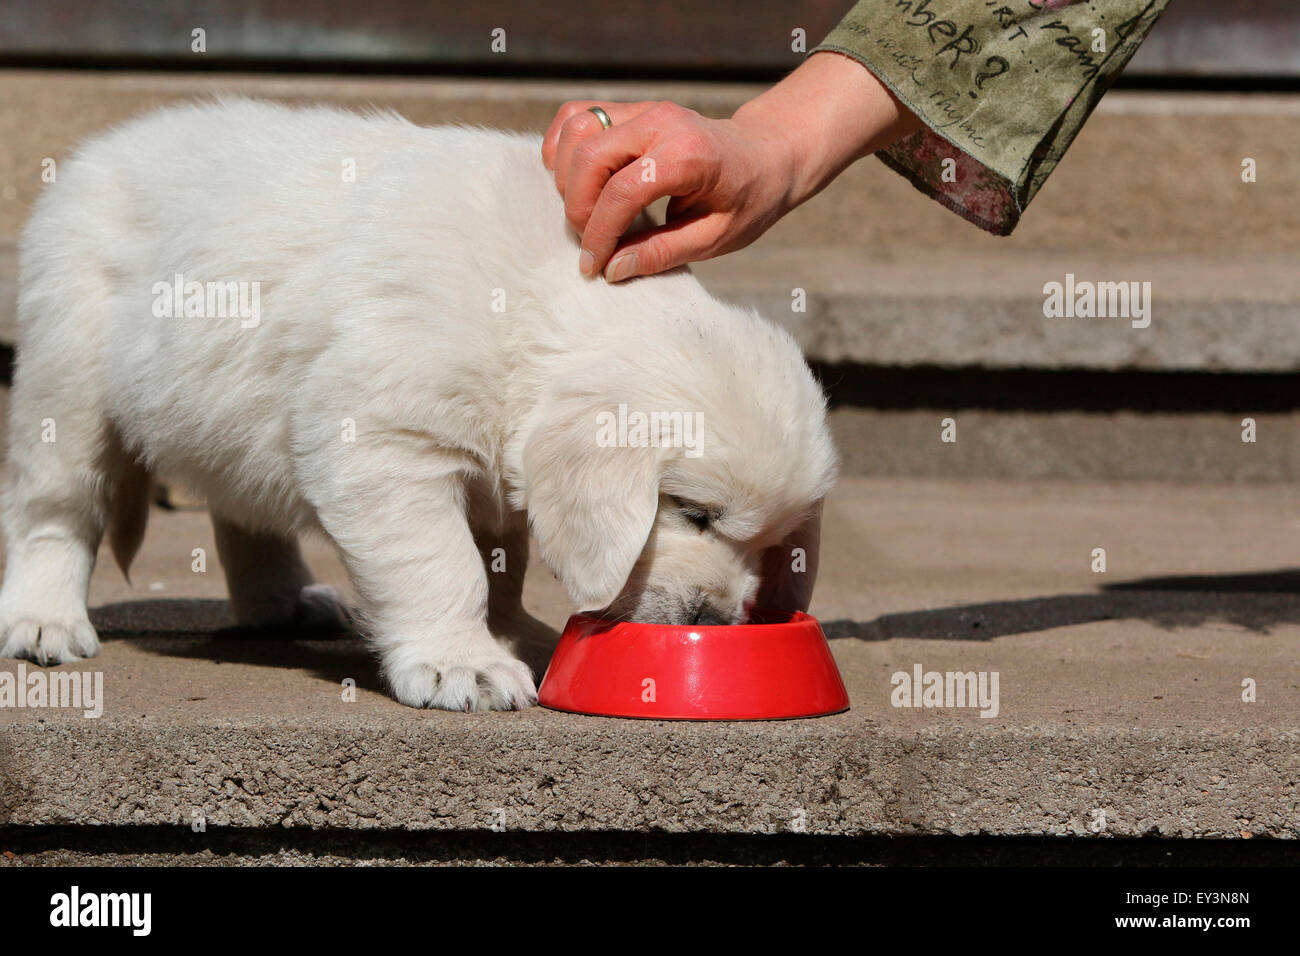 Golden Retriever. Puppy Lino (8 weeks old) eating from a red feeding bowl while being petted. Germany Stock Photo